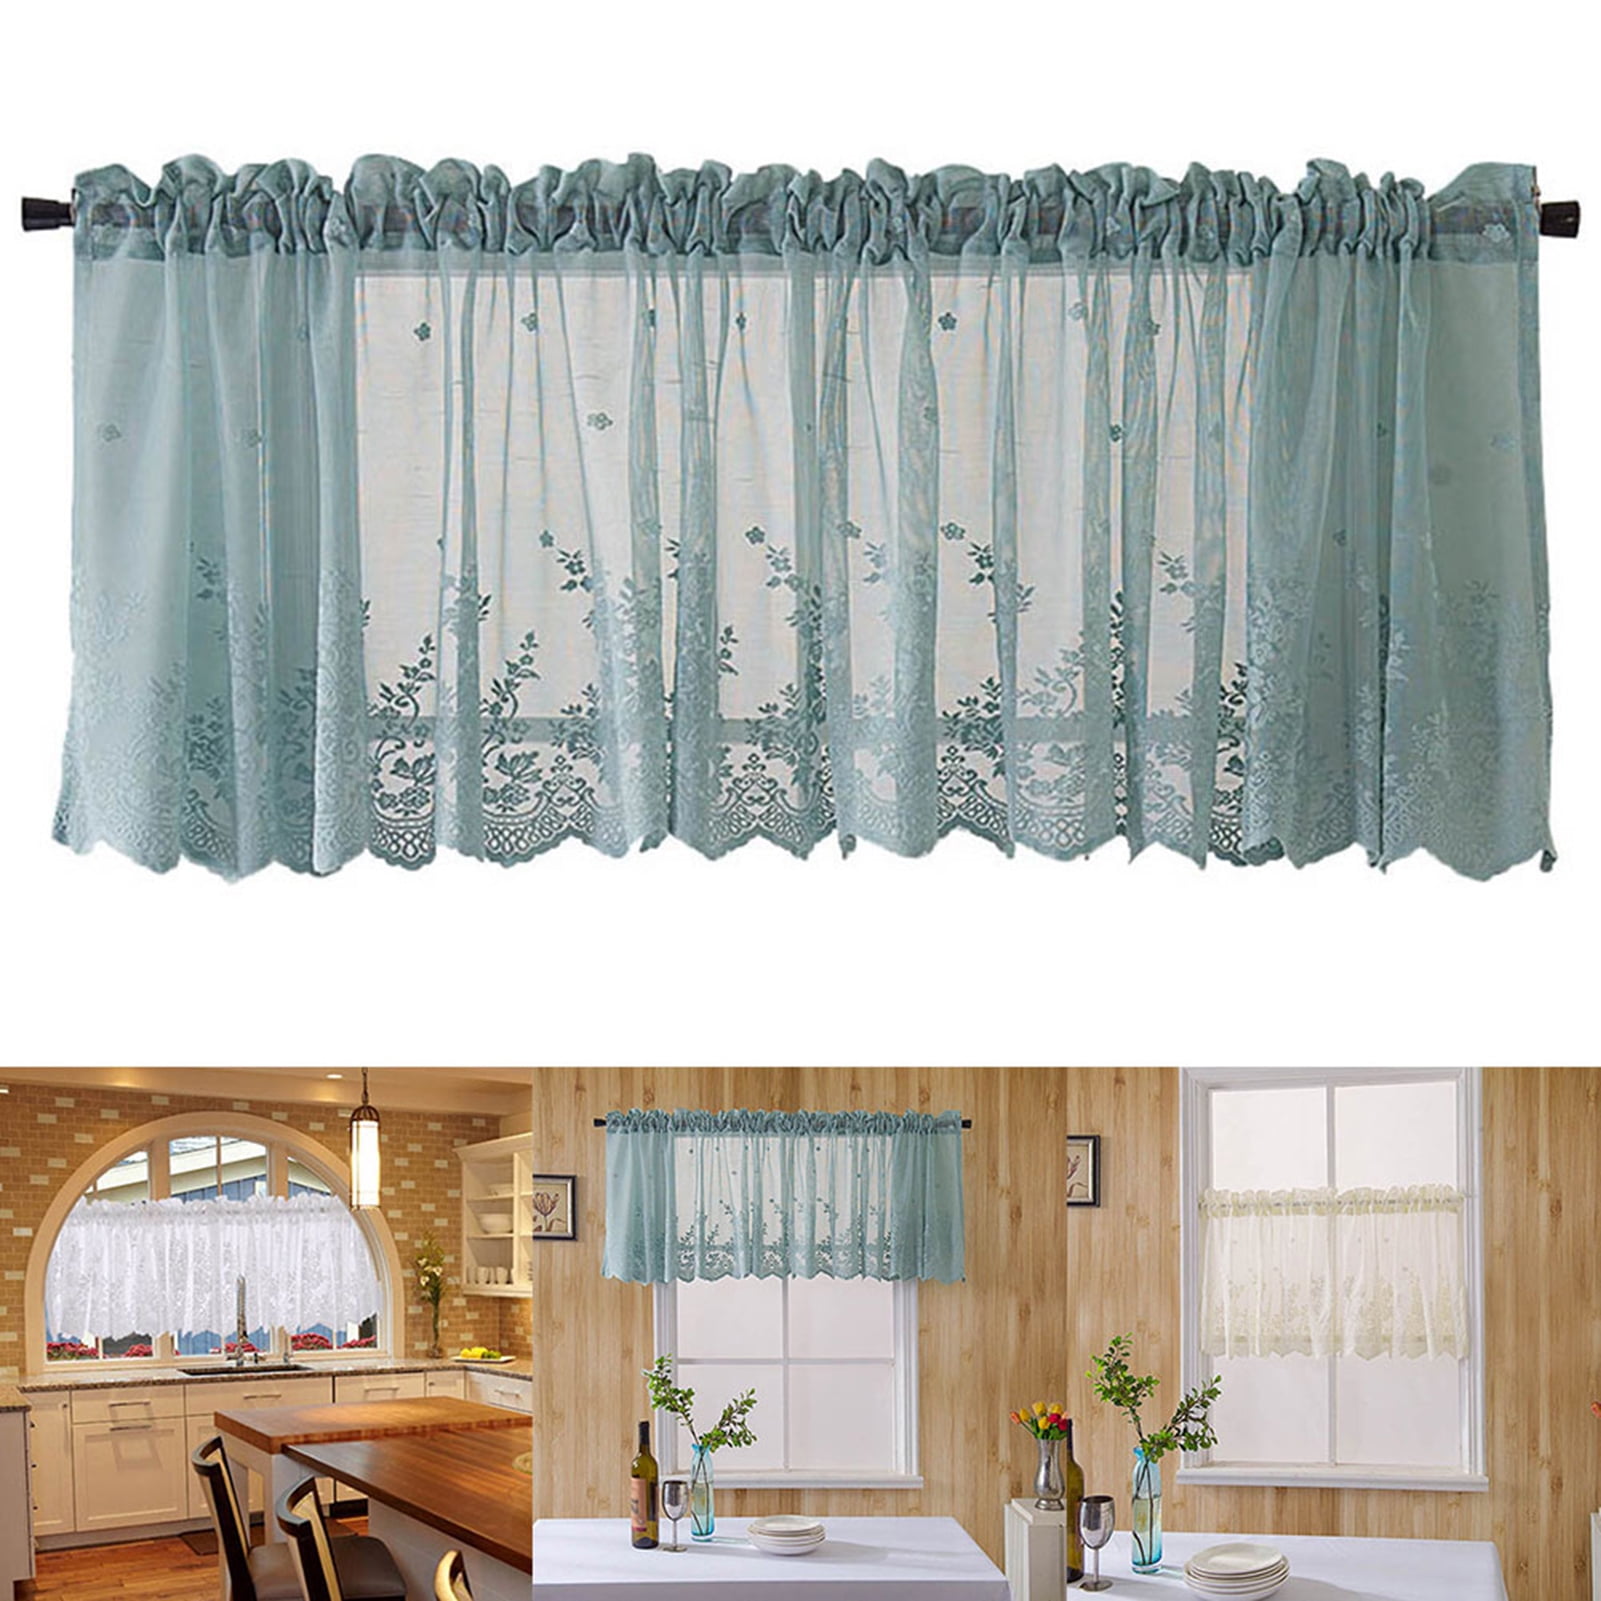 130x41cm Embroidered Lace Kitchen Short Curtain Window Valance Sheer Voile Blue 